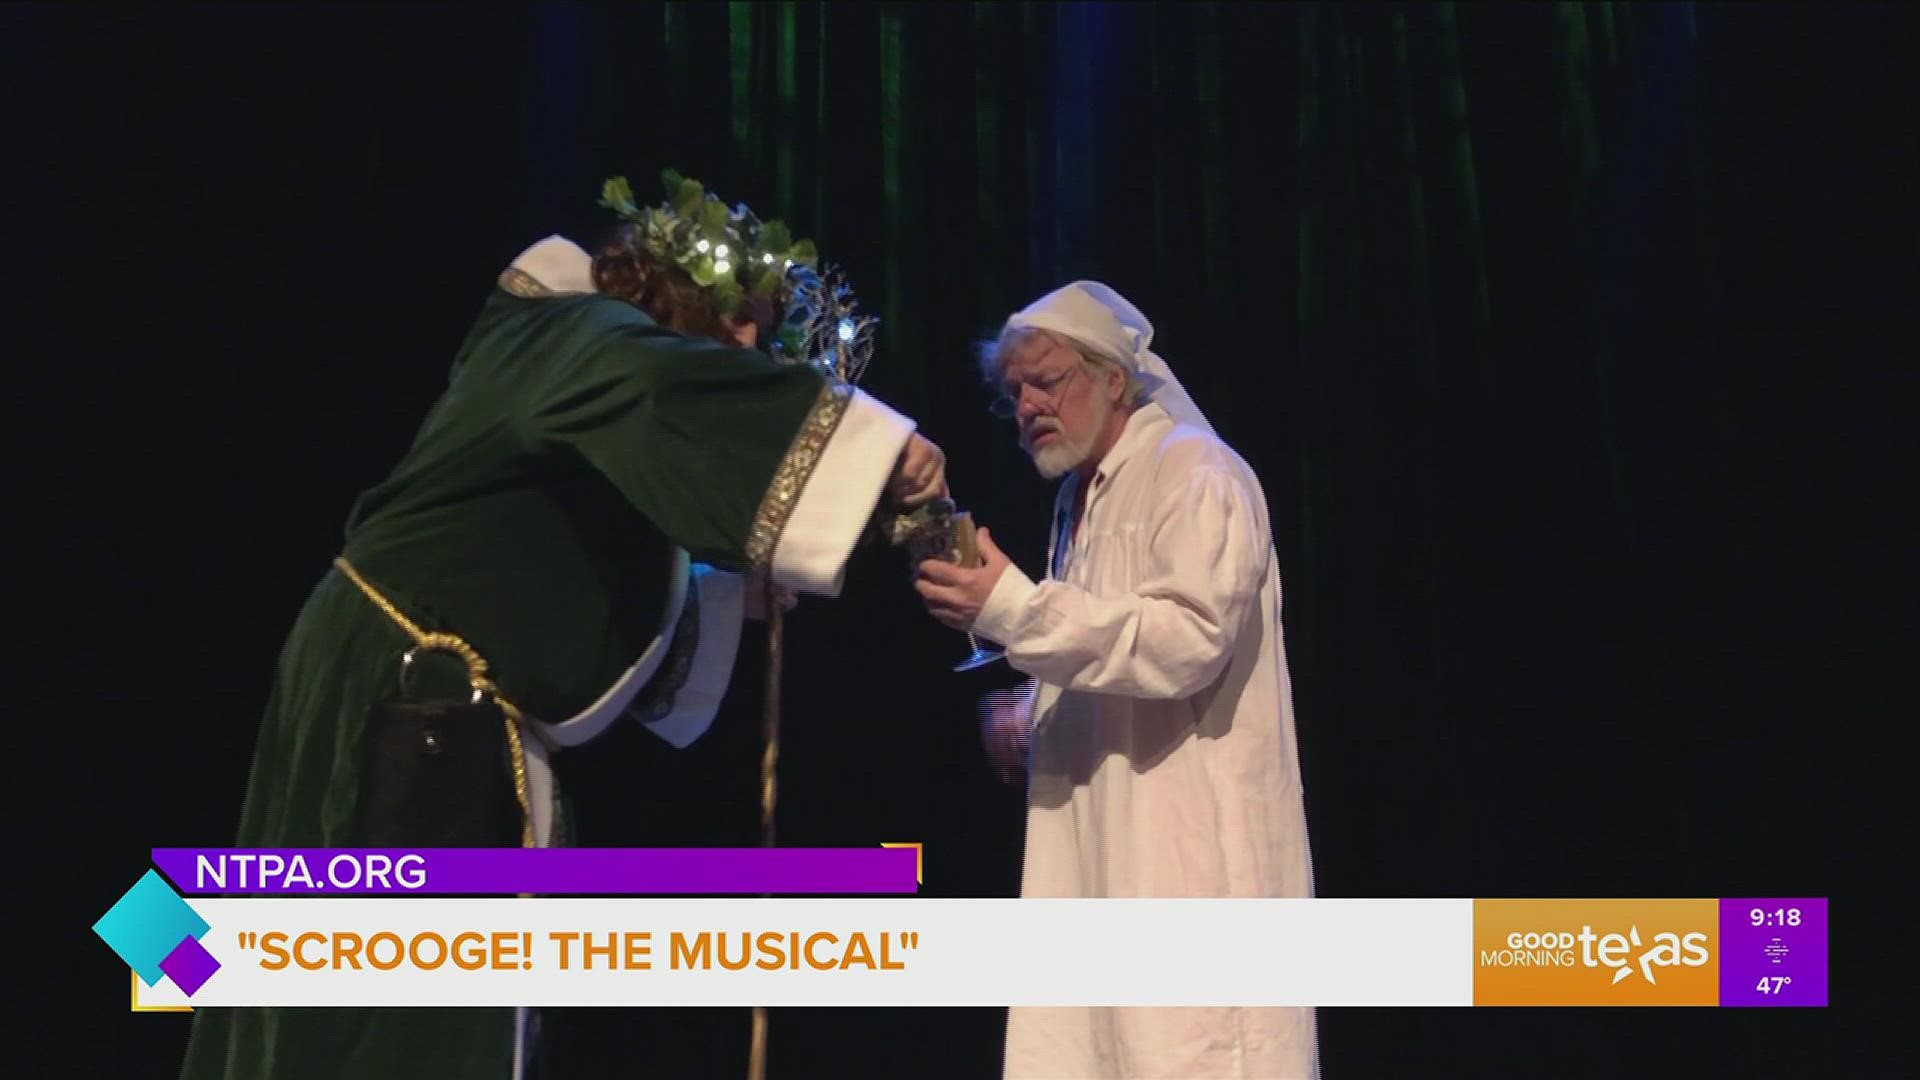 "Scrooge! The Musical" is on stage at December 9-13 at The Courtyard Theater in historic downtown Plano